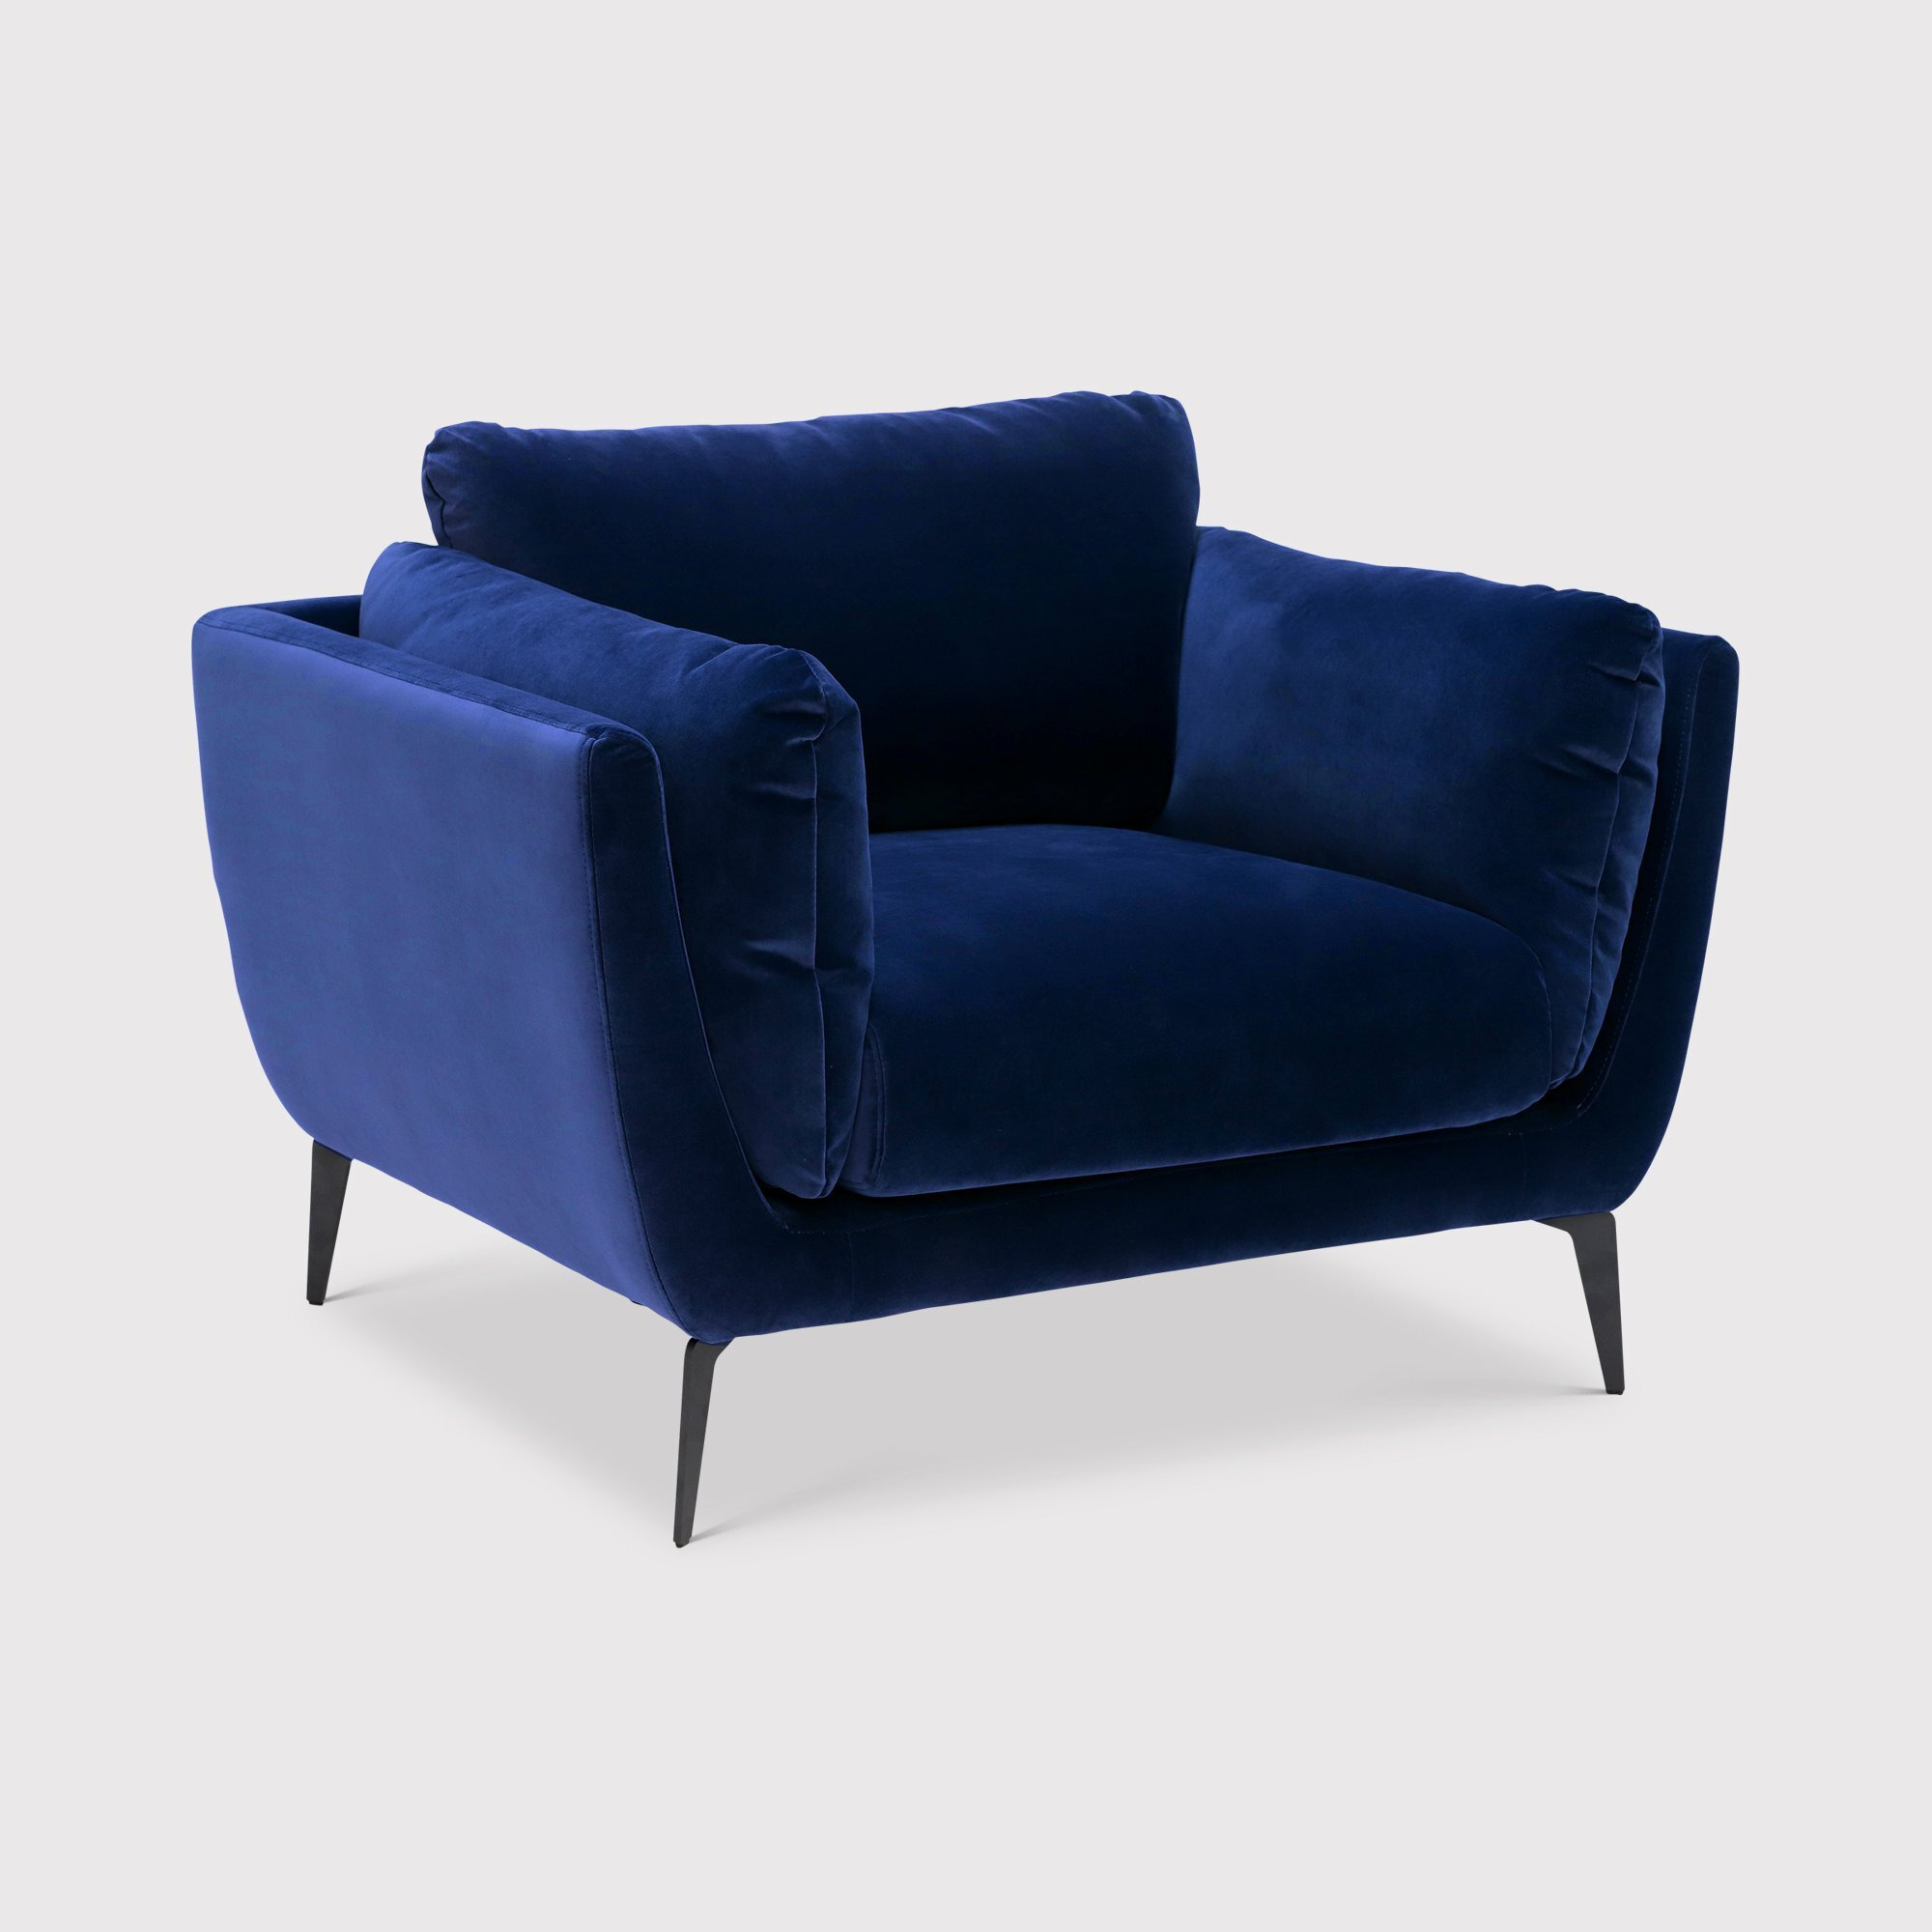 Boone Tub Chair, Navy Fabric - Barker & Stonehouse - image 1